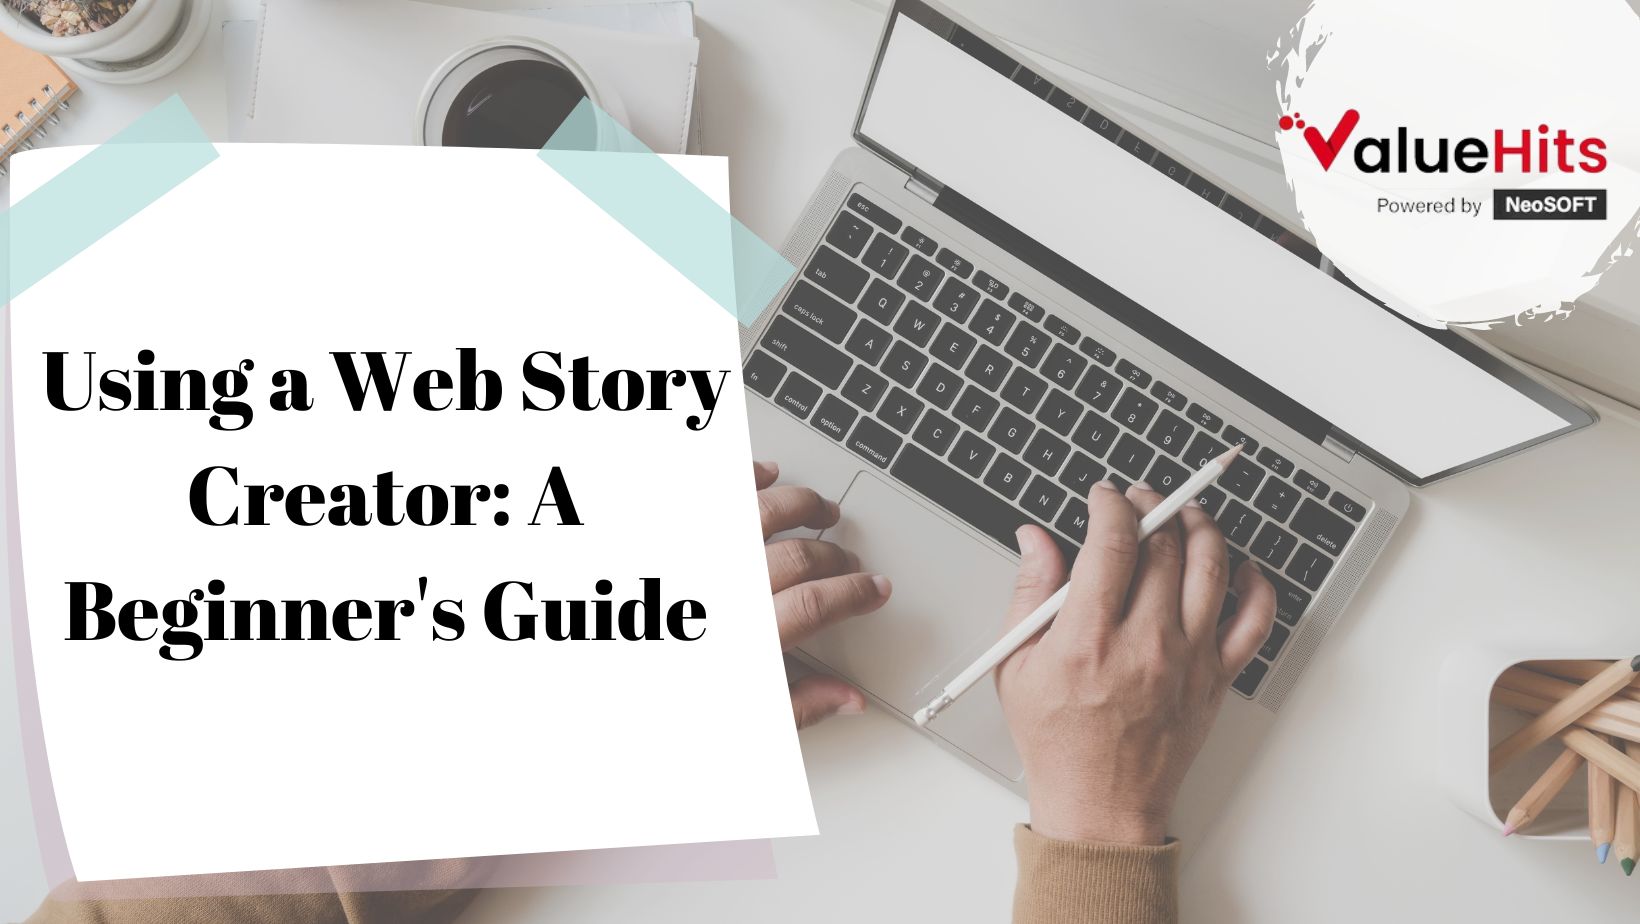 Using a Web Story Creator: A Beginner's Guide